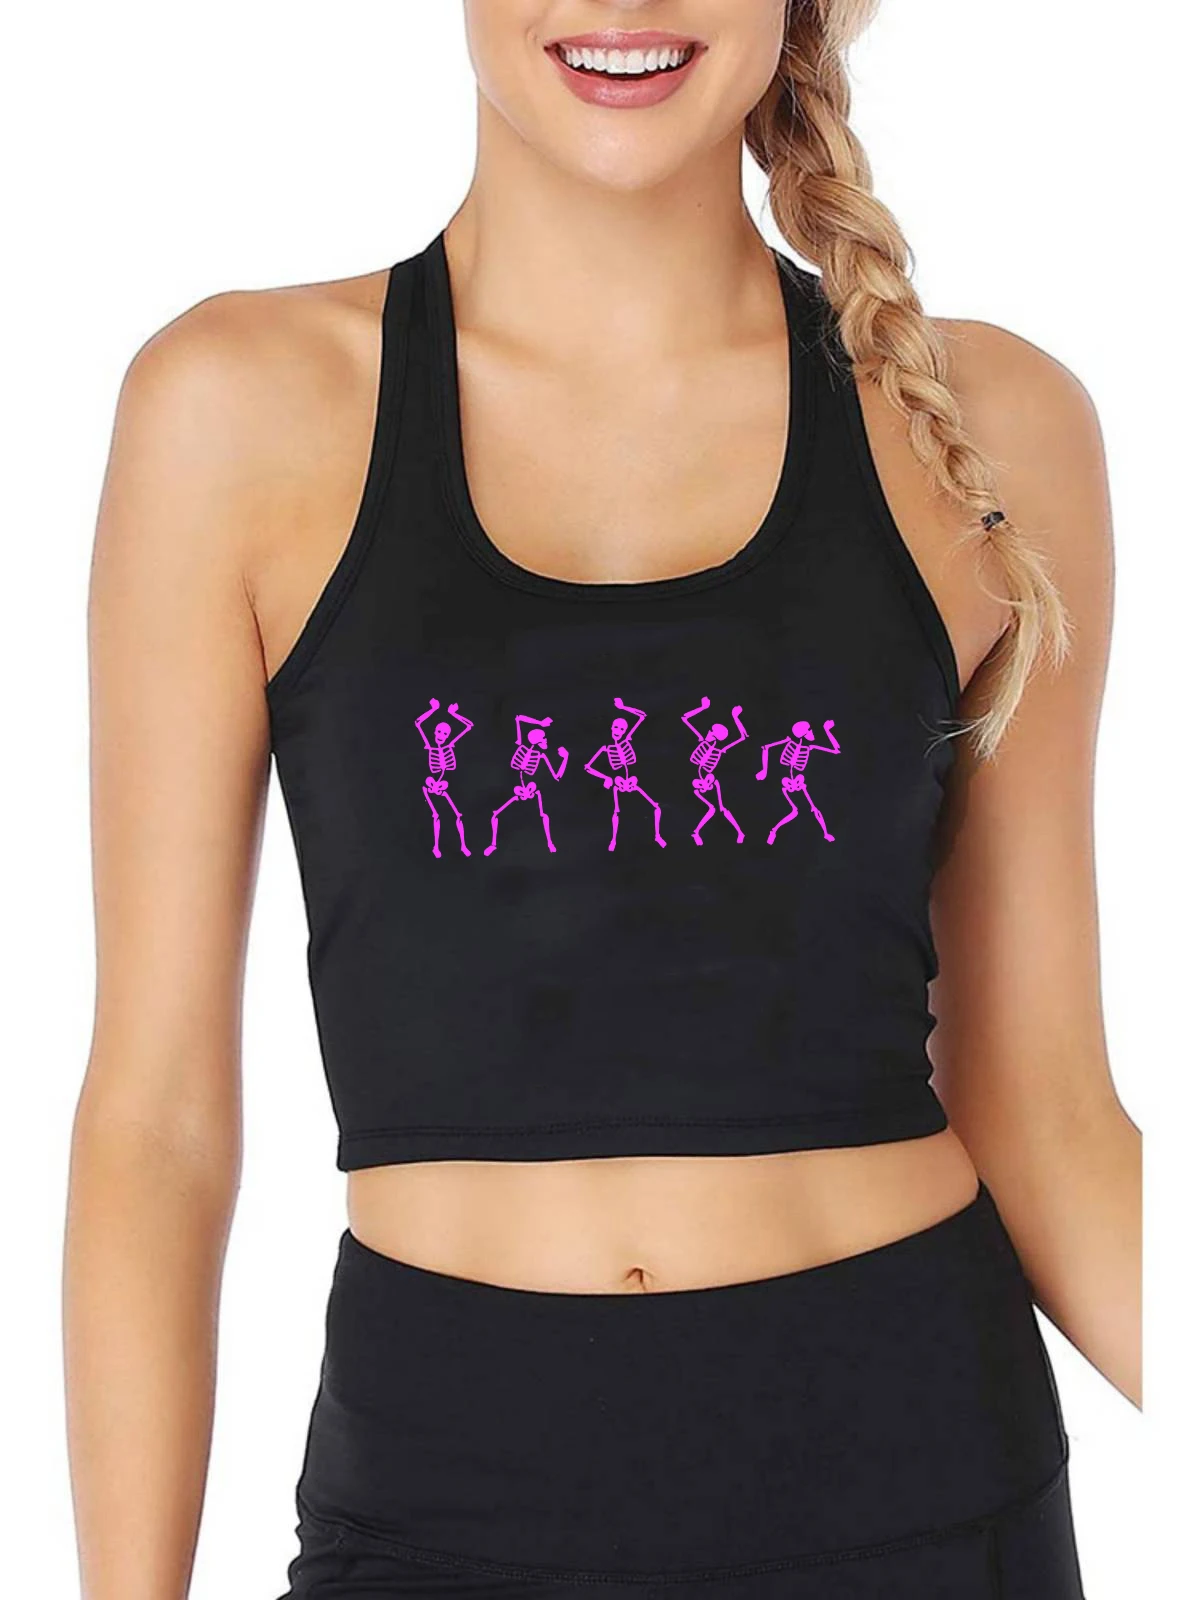 

Pink Spooky Dancing Skeletons Design Tank Tops Women's Personality Trend Sexy Breathable Crop Top Gym Training Camisole